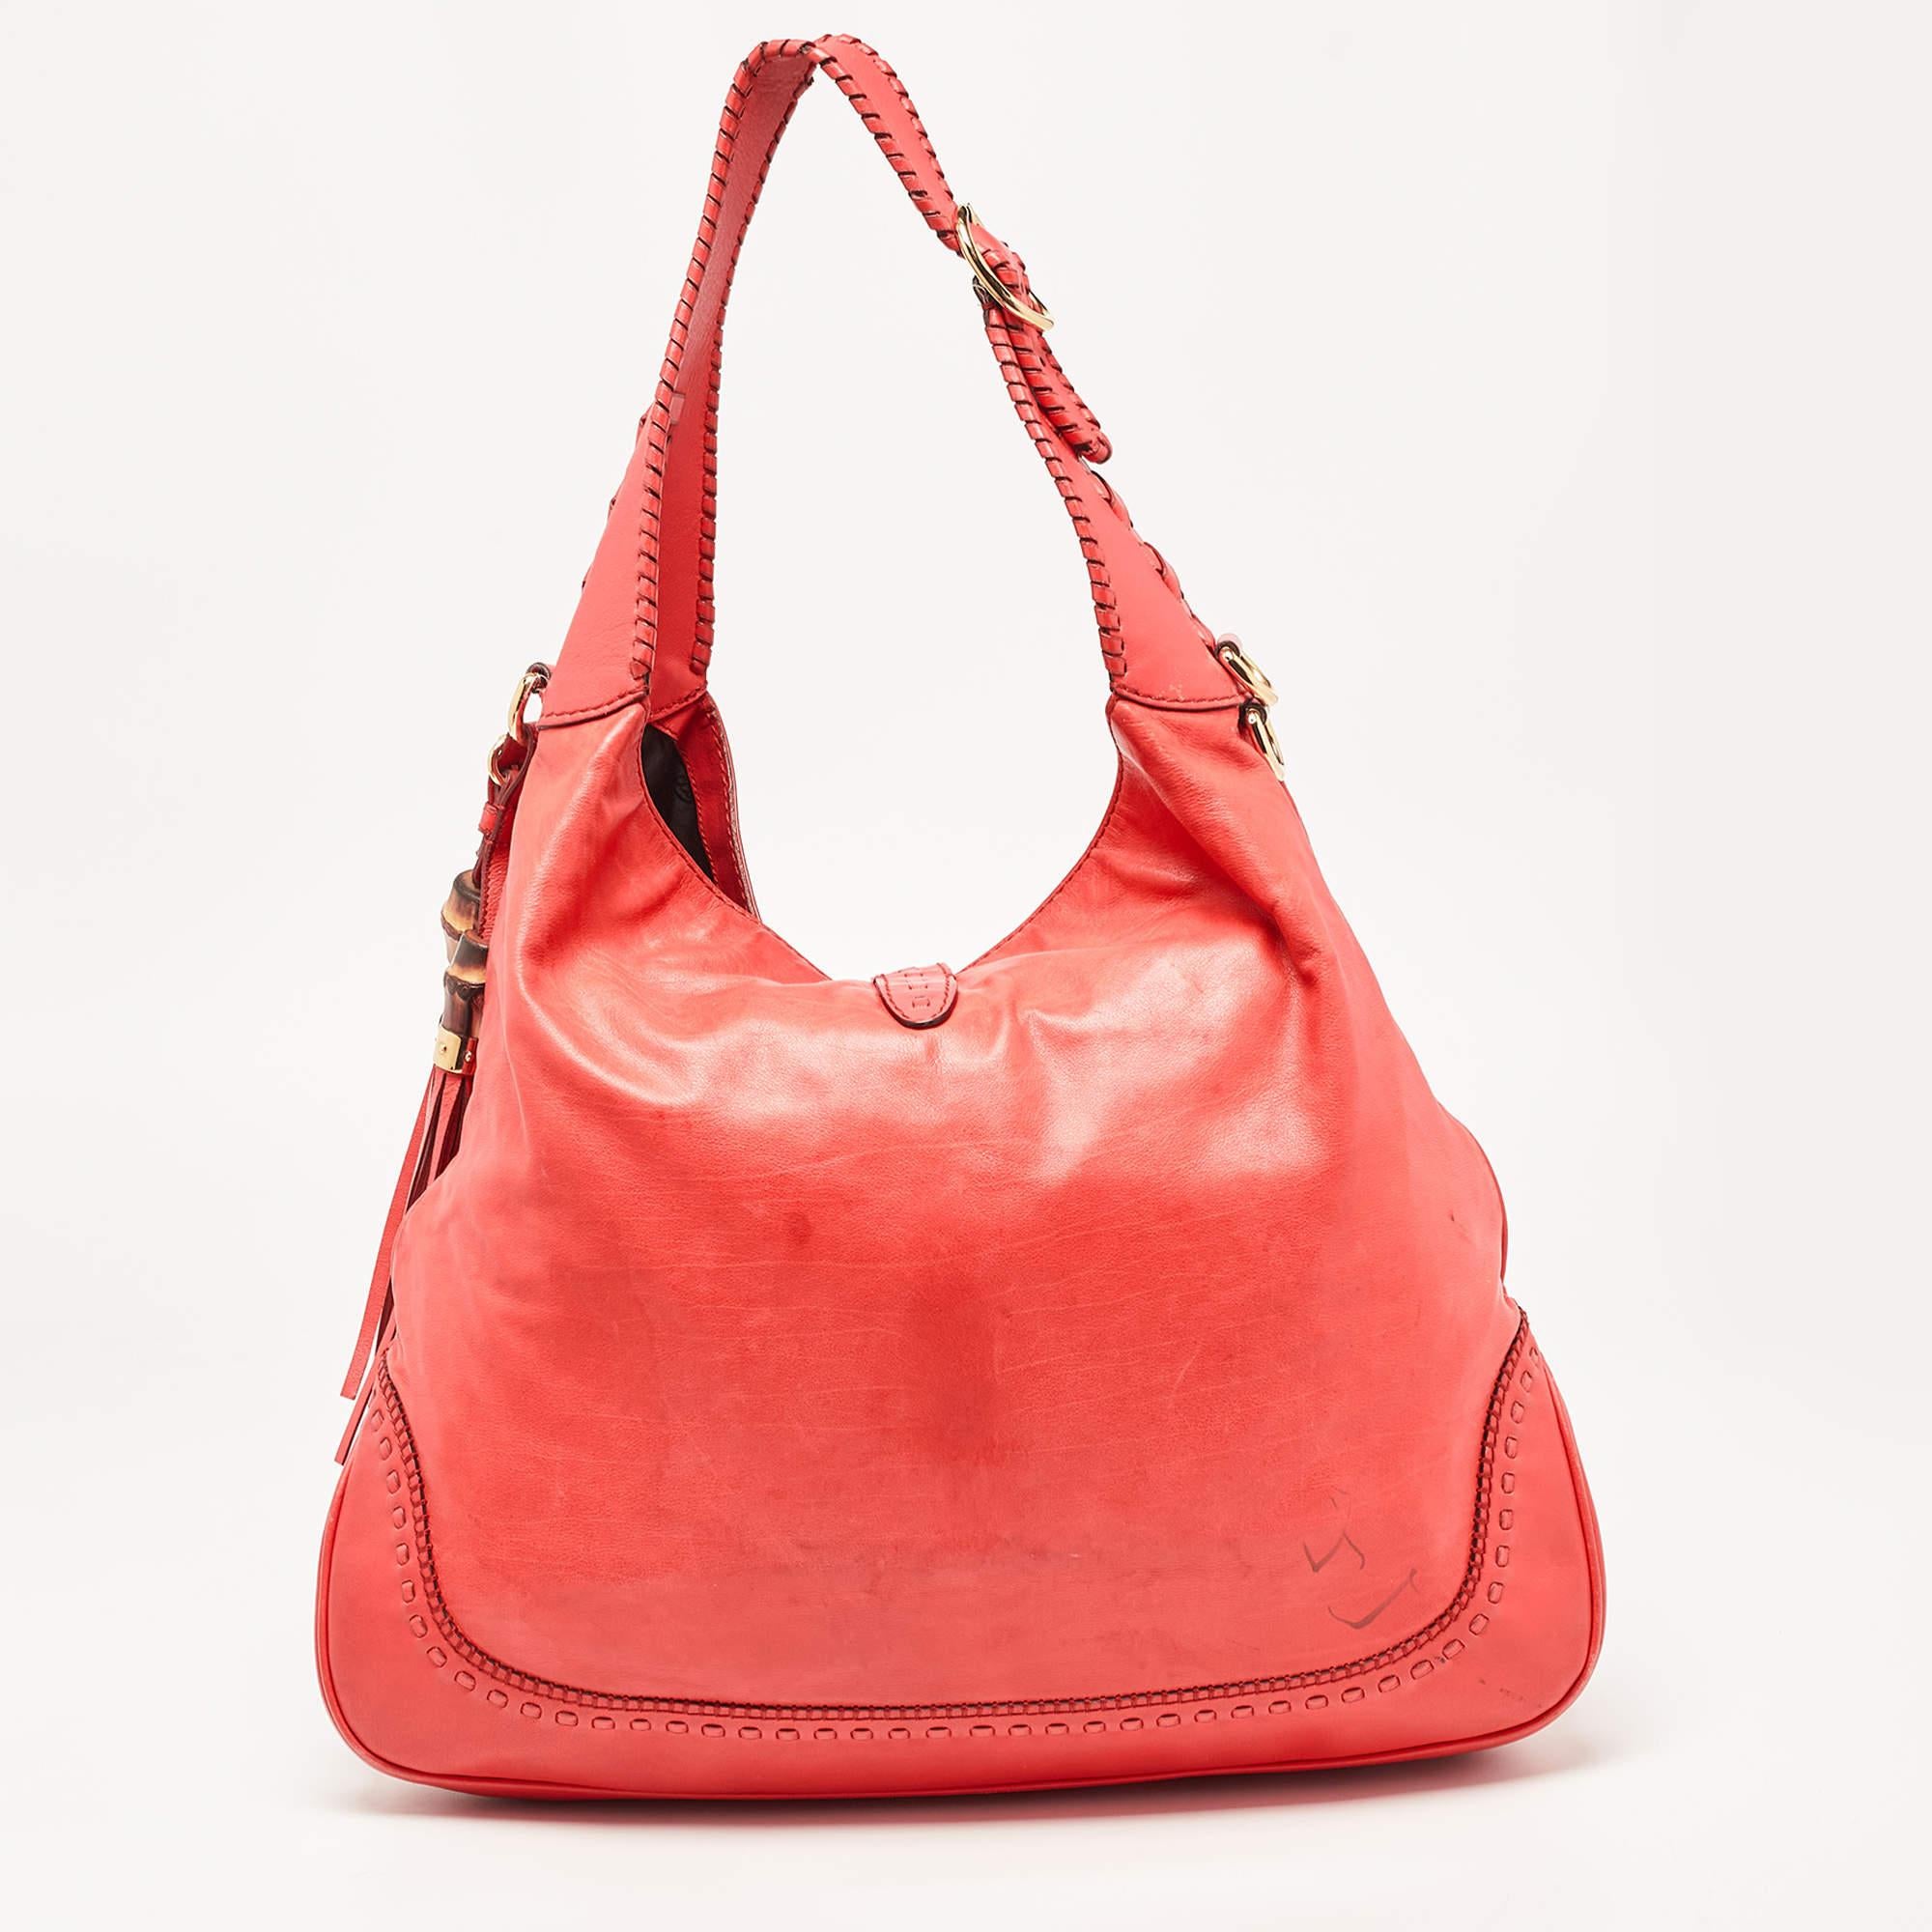 Gucci has always offered a bevy of cult-favorite bags, just like this New Jackie hobo created as a homage to Jacqueline Kennedy Onassis. It is crafted from leather and flaunts a coral red shade. A piston push-lock closure opens to a roomy interior